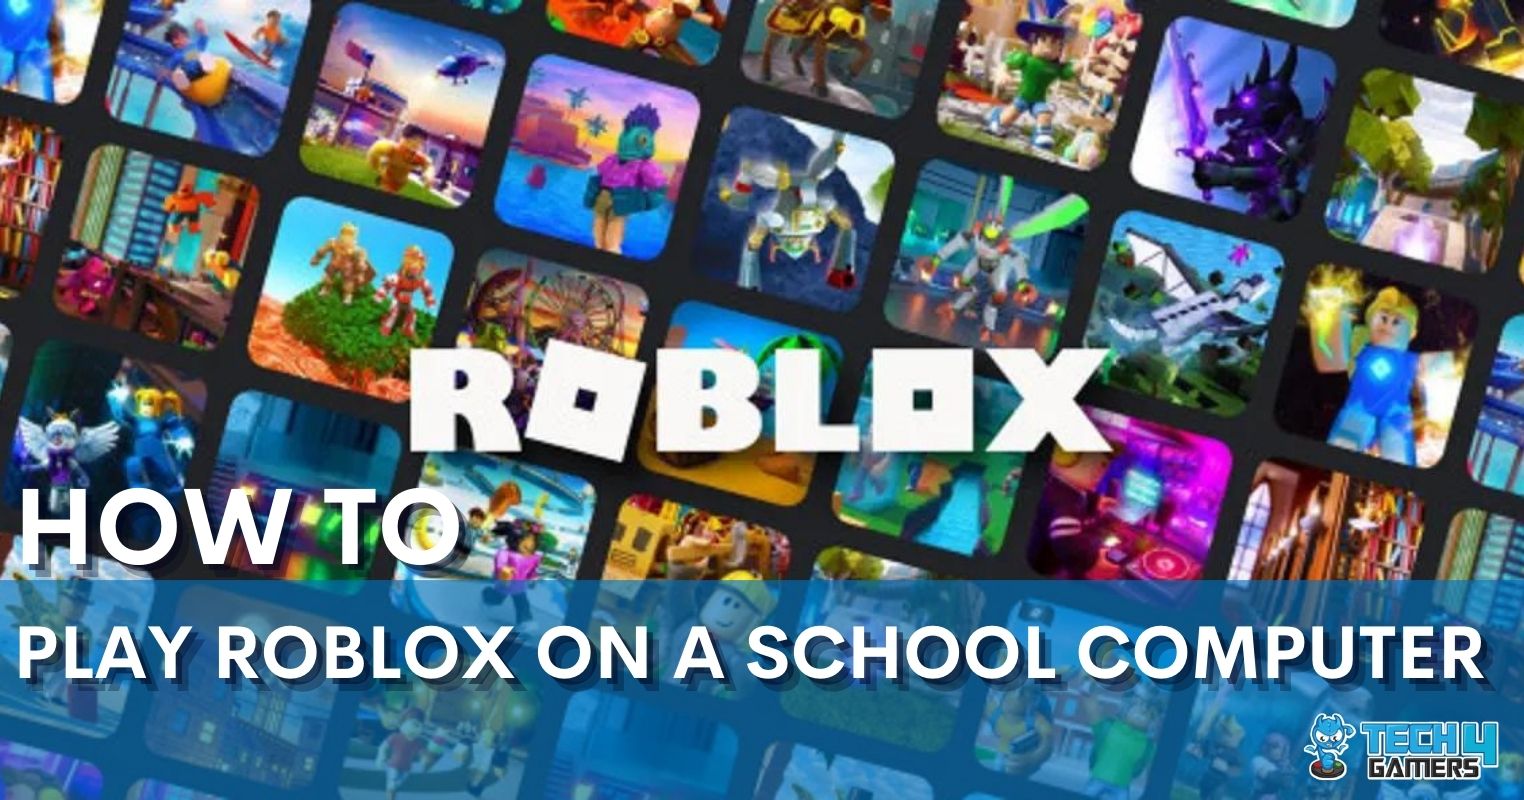 How To Play Roblox On A School Computer - Tech4Gamers